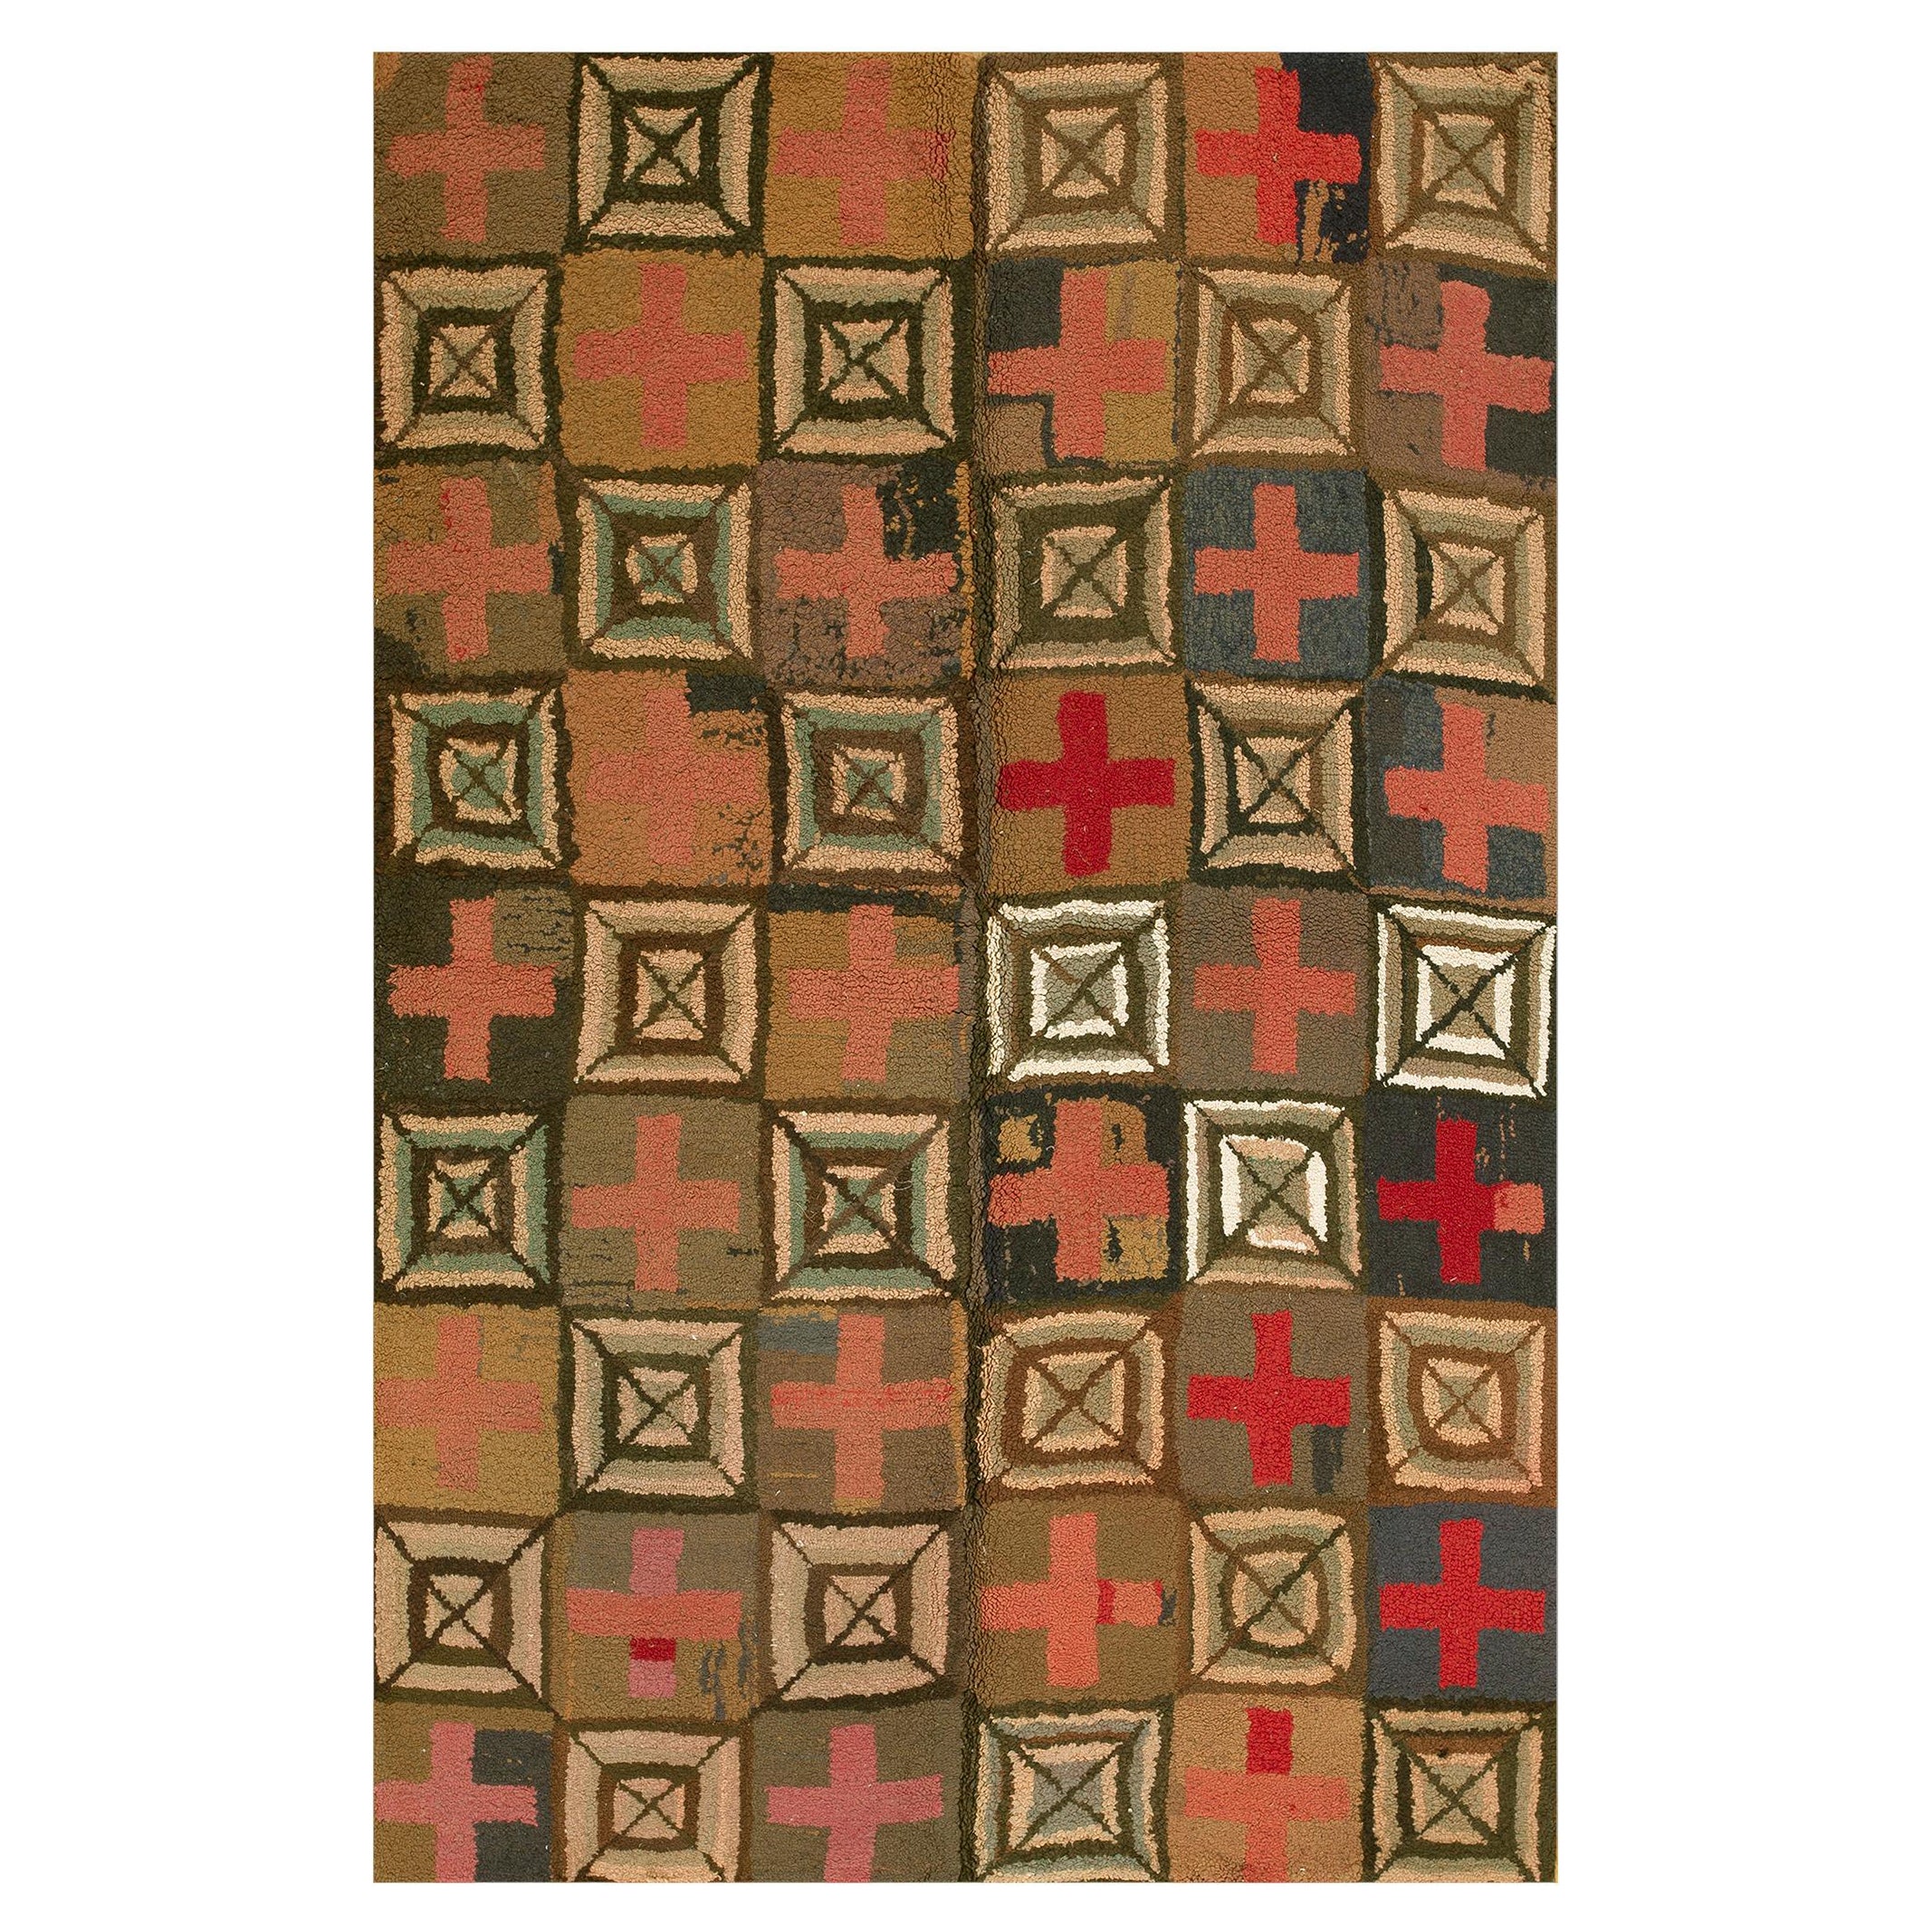 Mid 20th Century American Hooked Rug ( 5' 10" x 8' 4" - 180 x 255 cm )